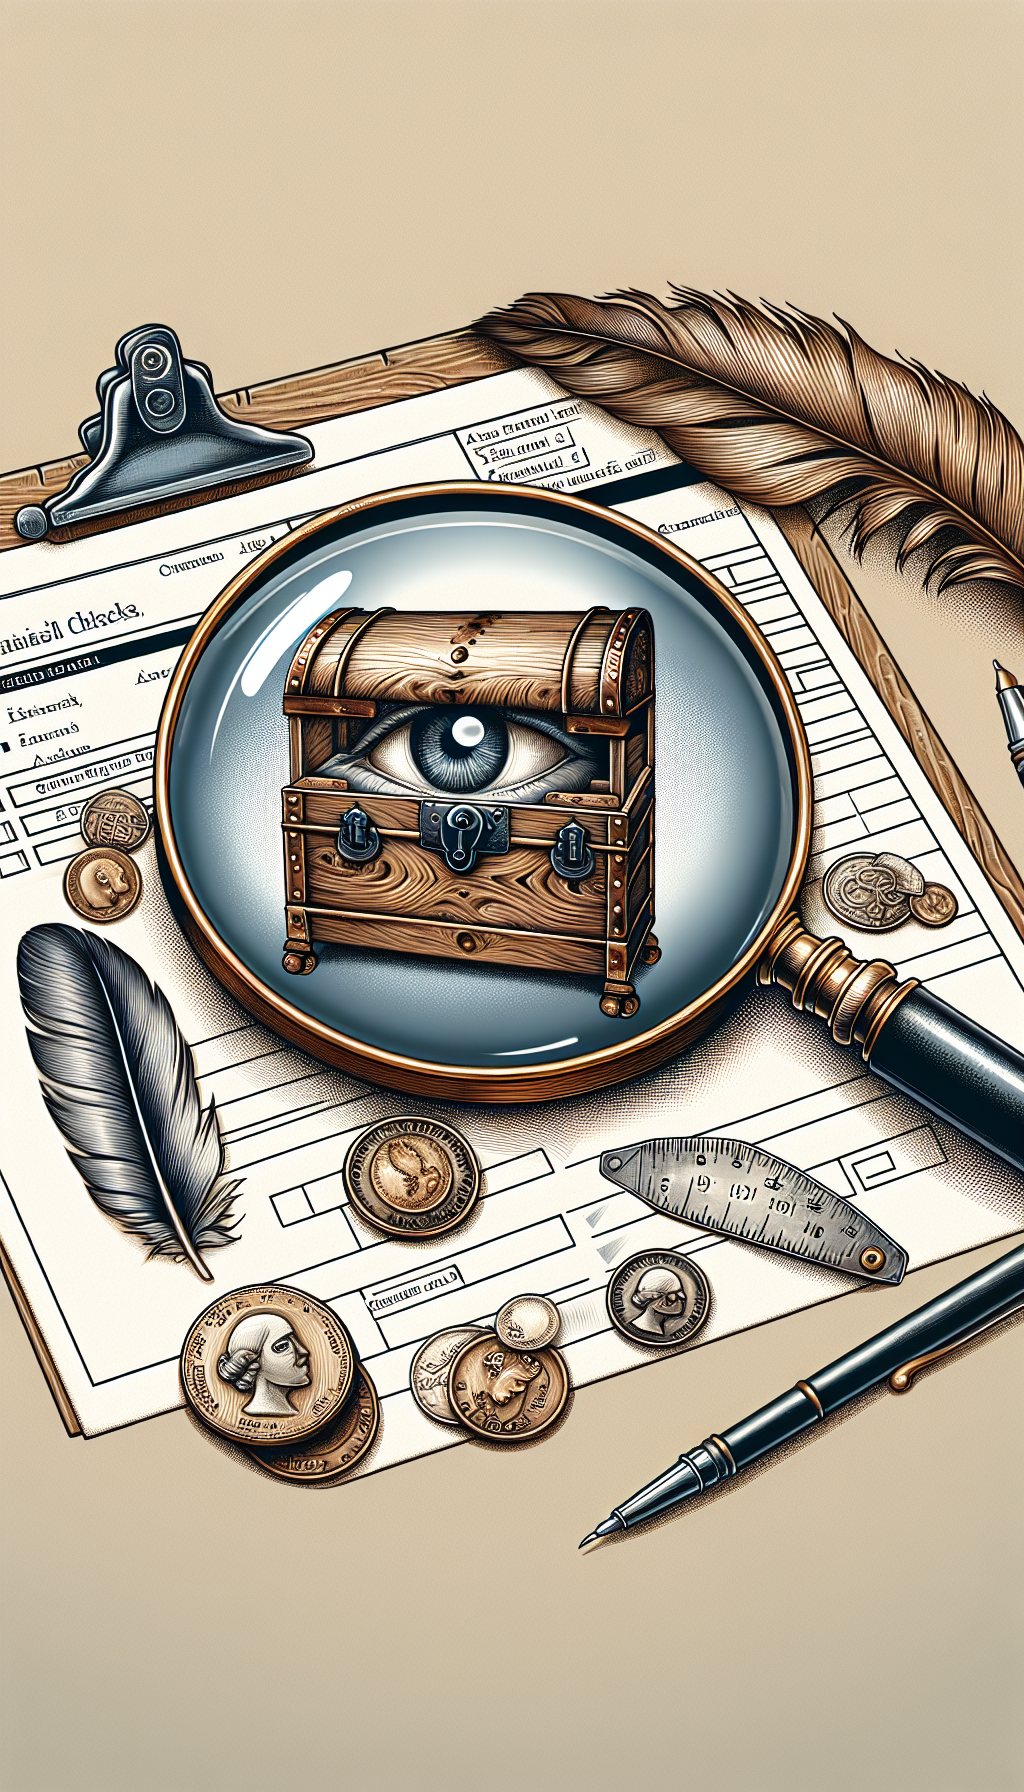 An illustration depicts a magnified monocled eye reflecting an antique steamer trunk, with intricate details etched into its wooden slats and brass fittings shining. Swirling around the trunk, a tape measure and an array of vintage coins indicate its value, while a feather pen and appraisal checklist overlay the image, suggesting expert scrutiny and valuation tips within.